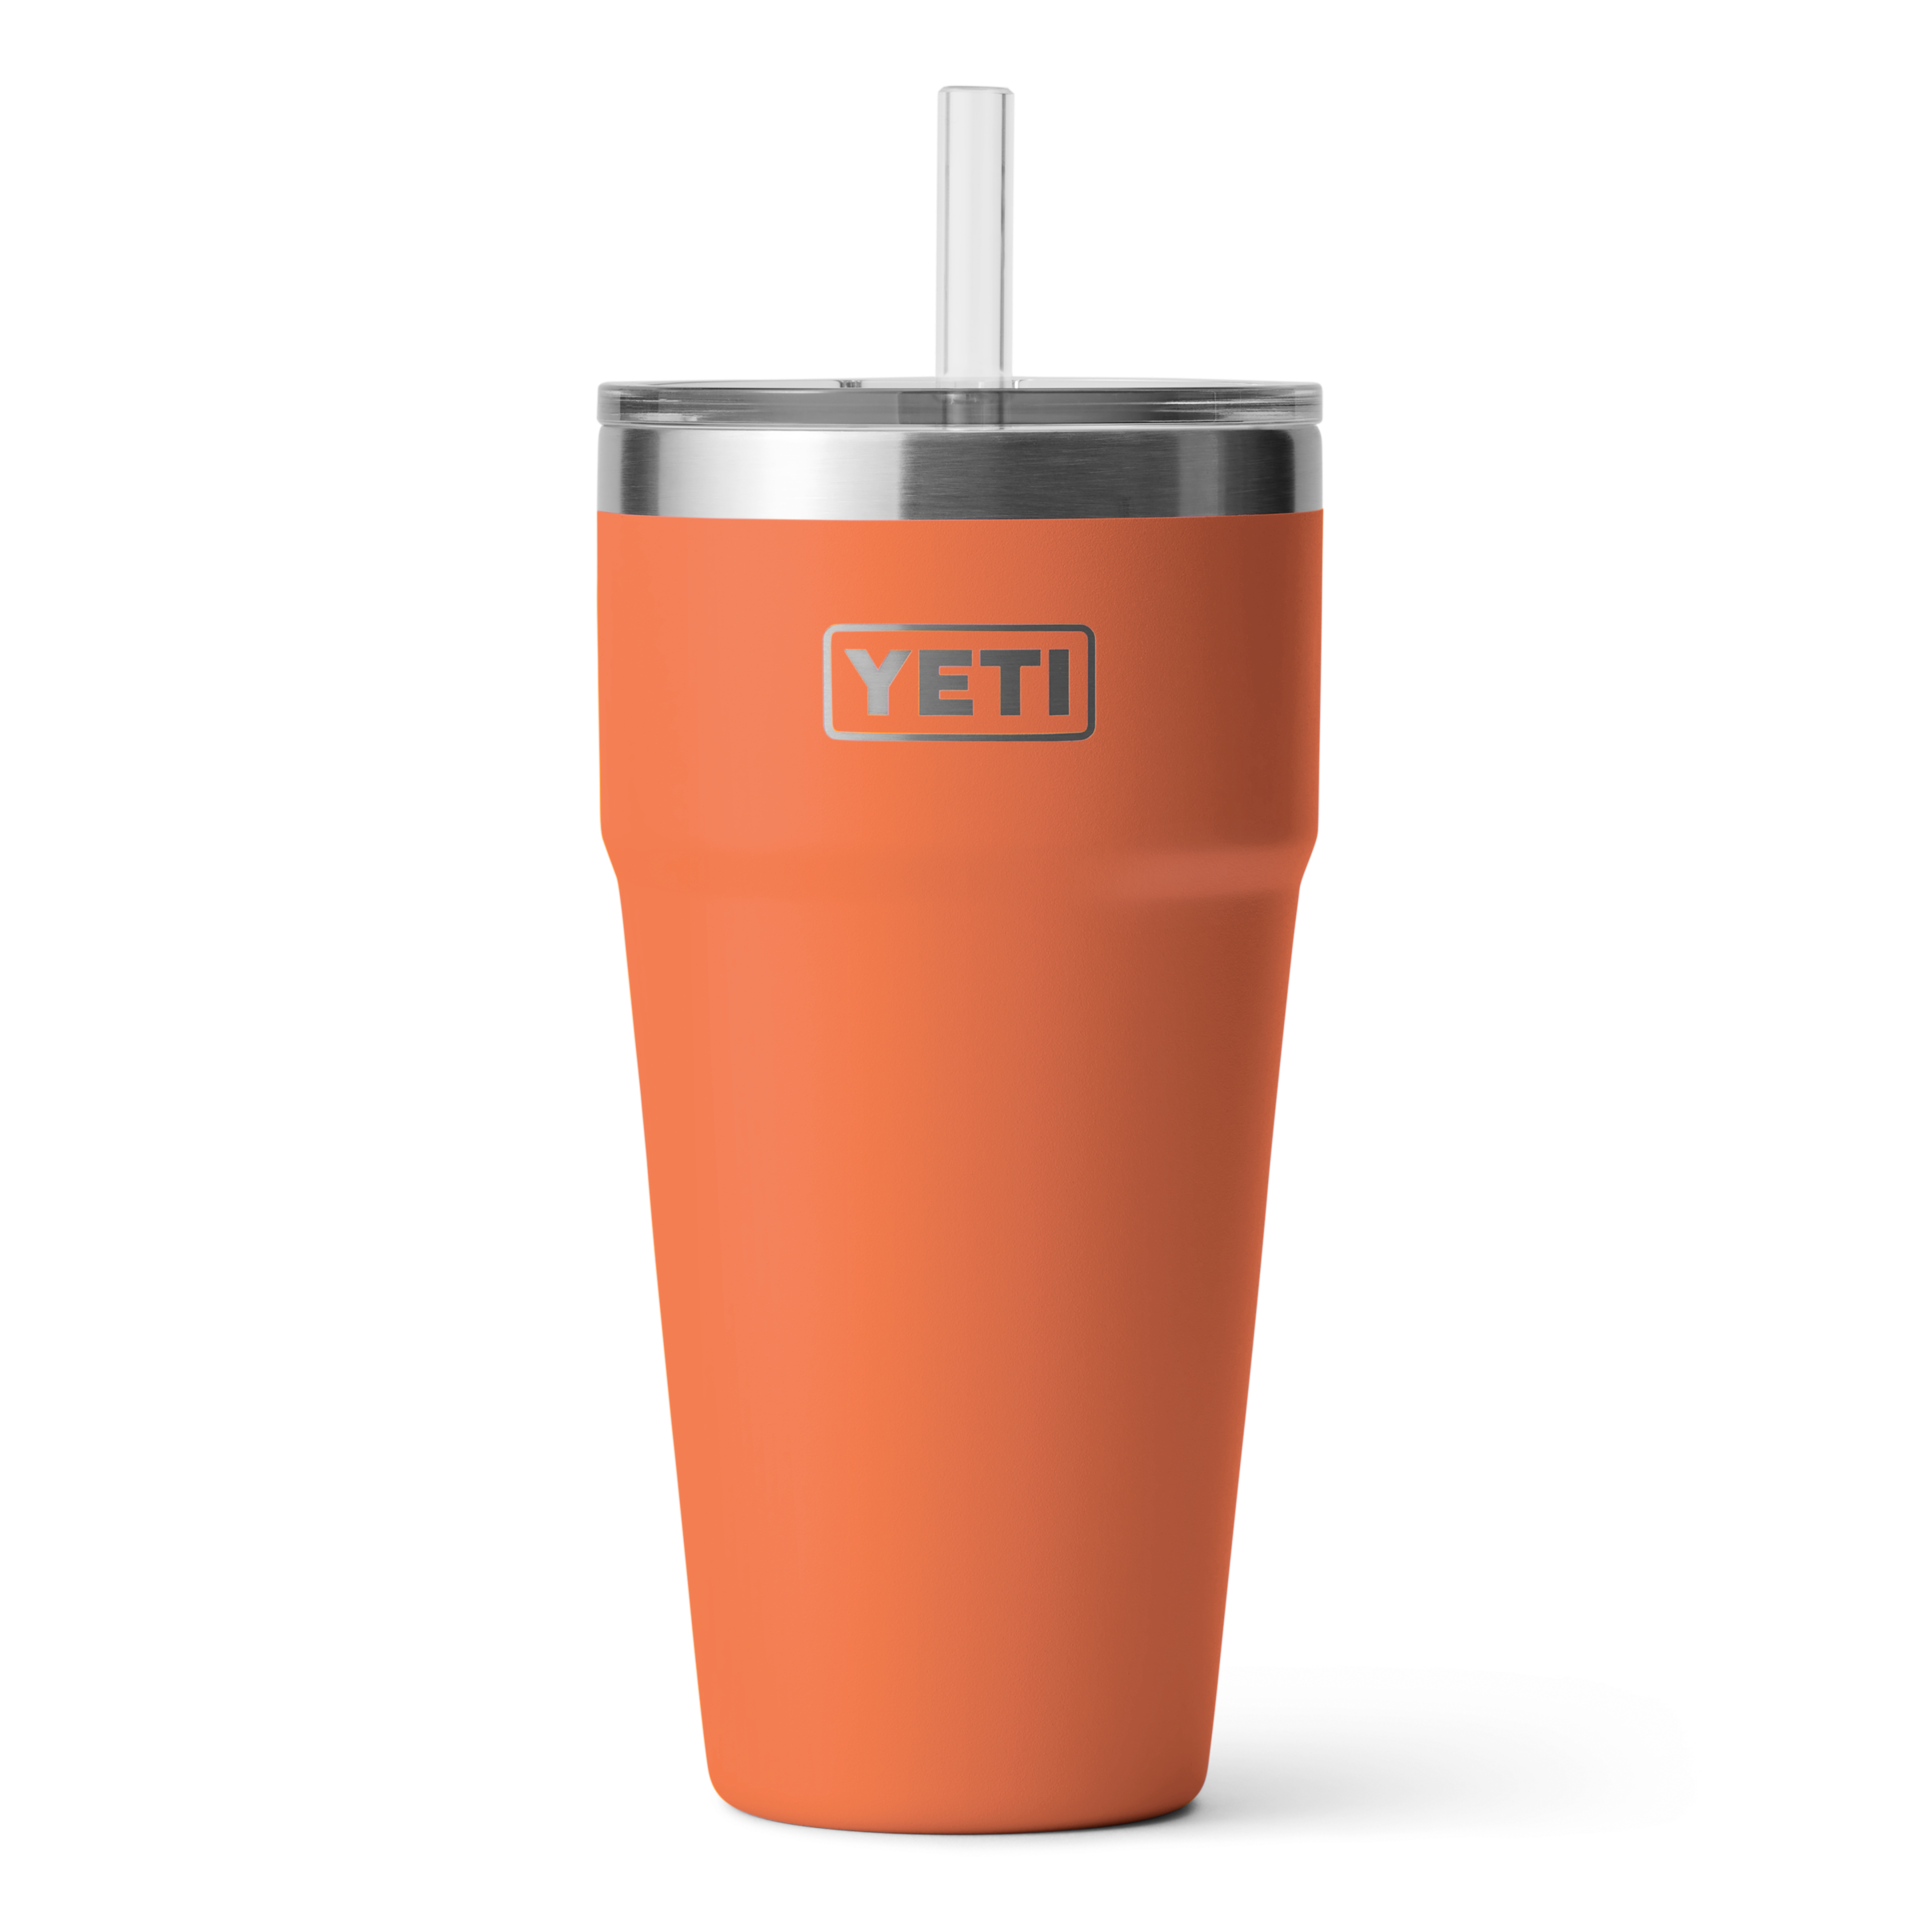 YETI Rambler Travel Mug with Straw Lid Comparison Strong Hold Lid